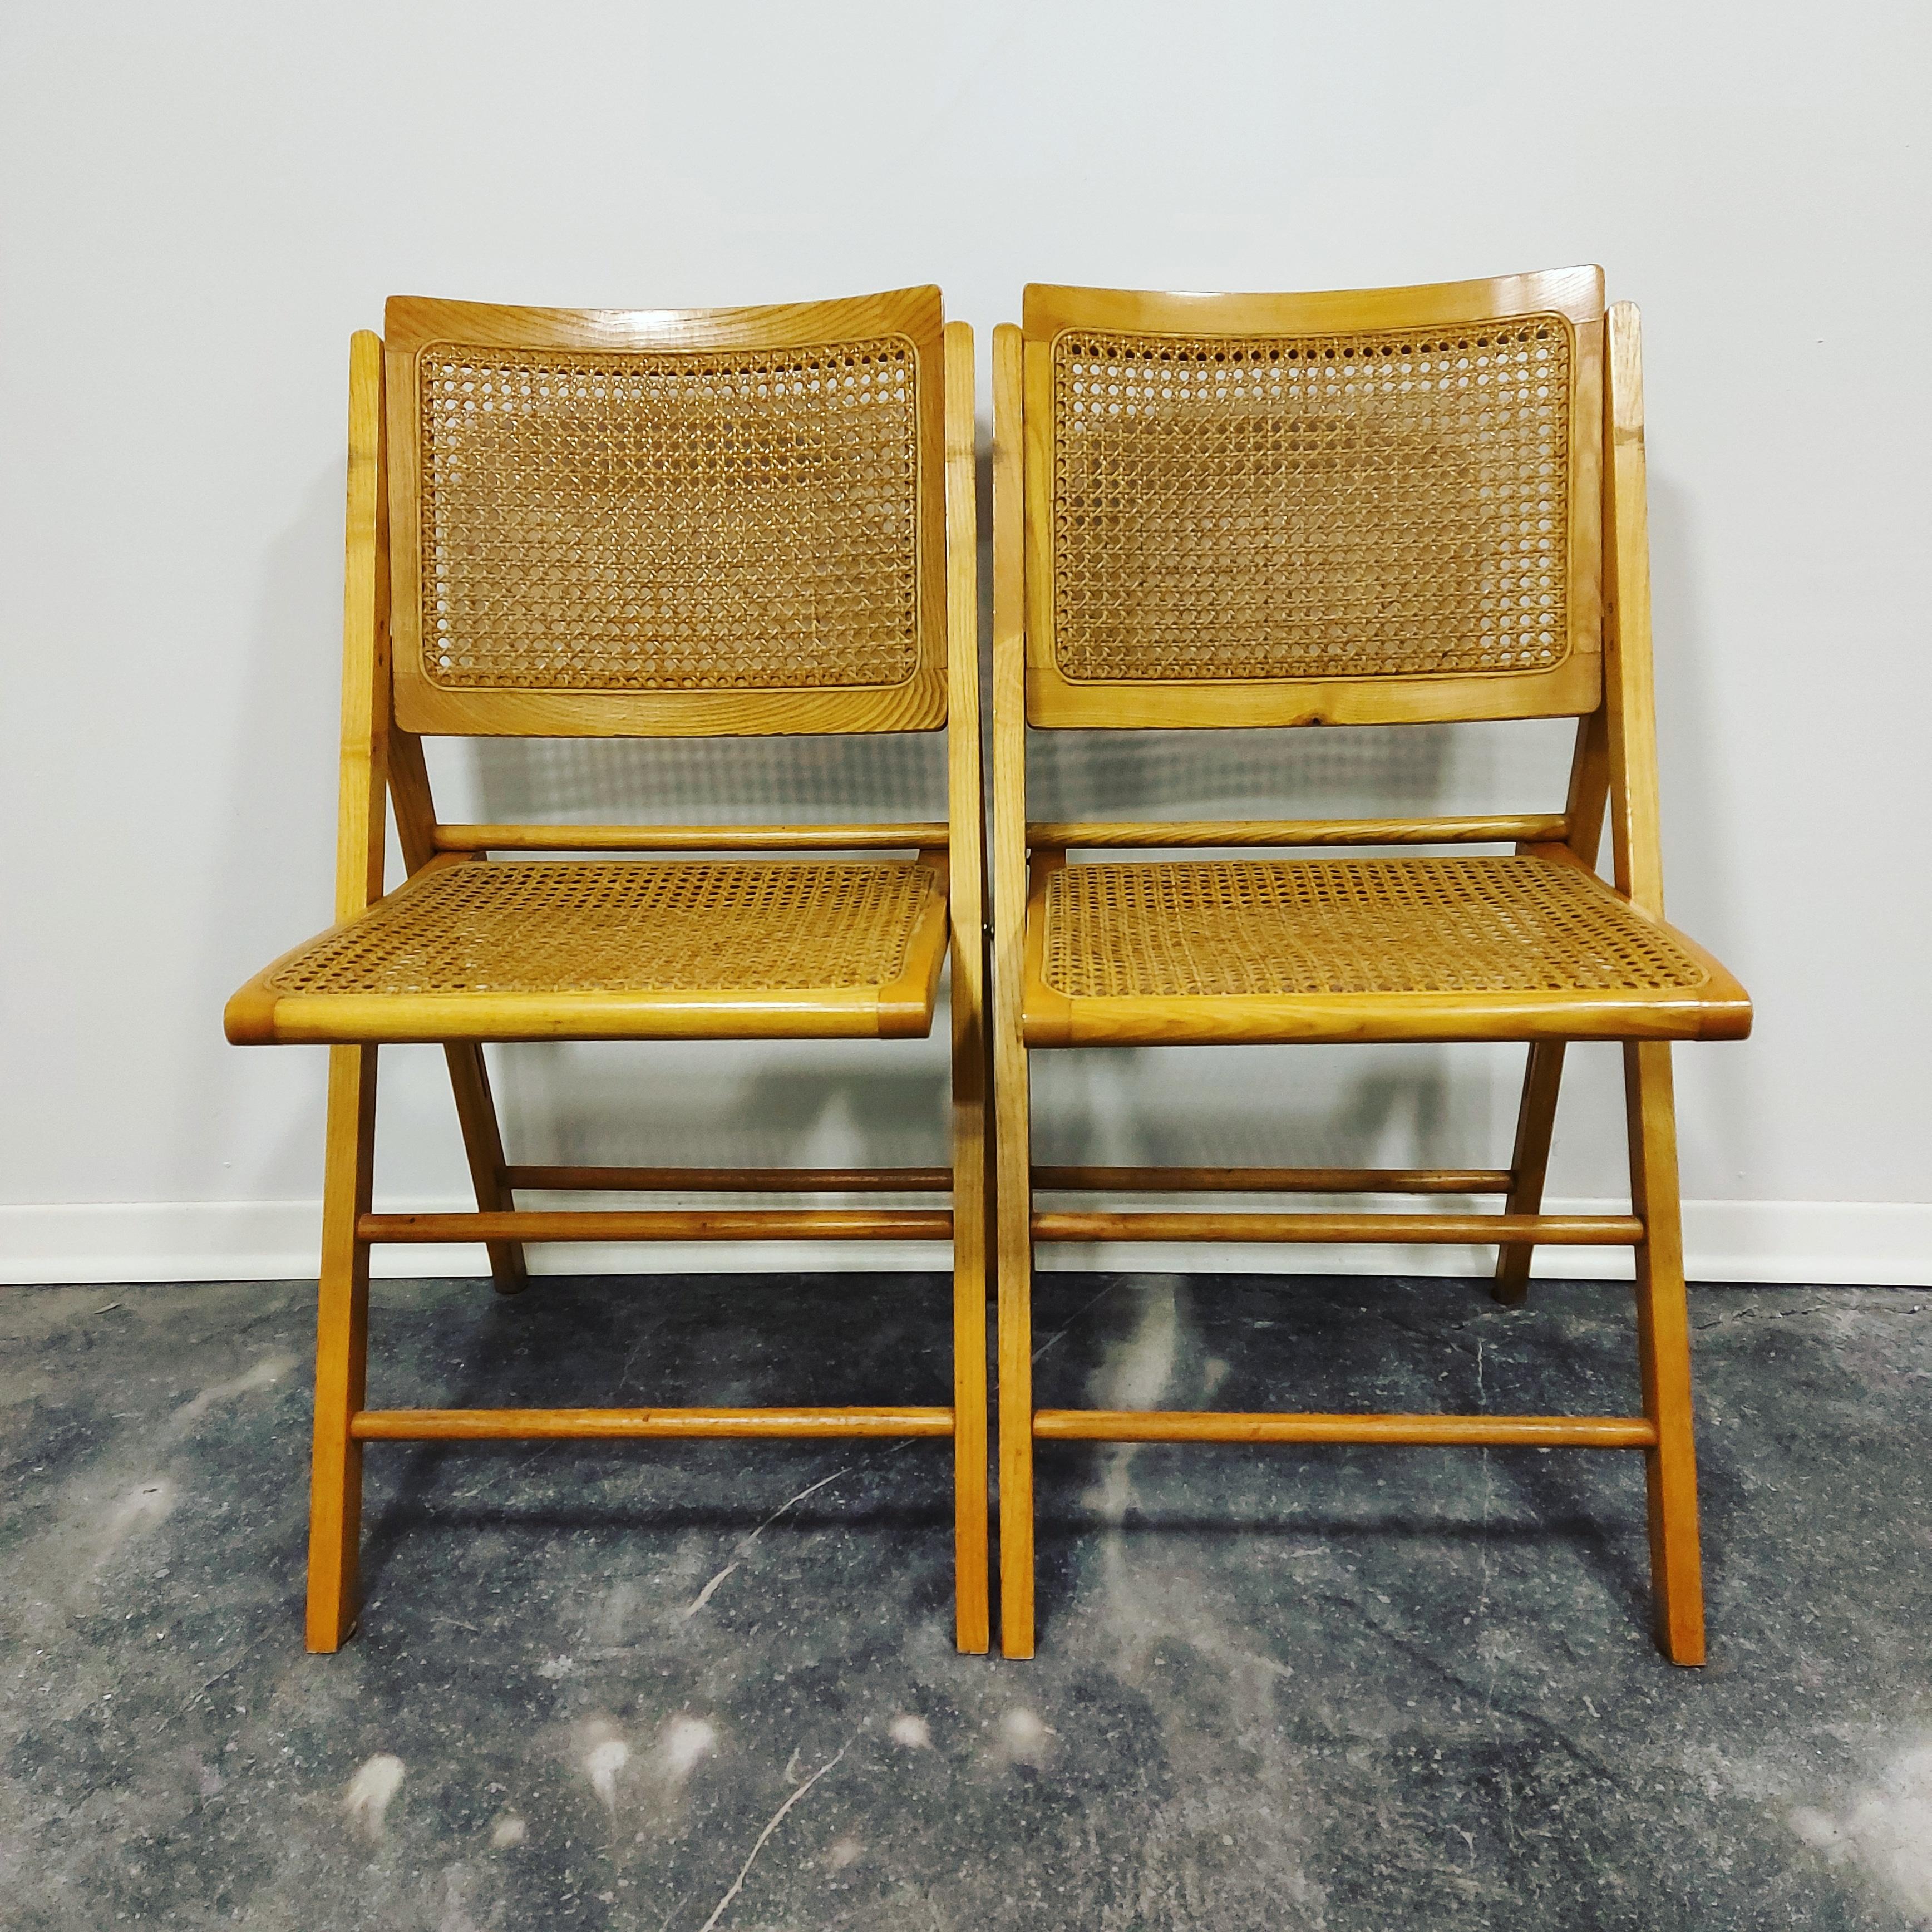 Folding chairs 1970s pair

Very confy to sit and.

Made in Italy and beautifly crafted.